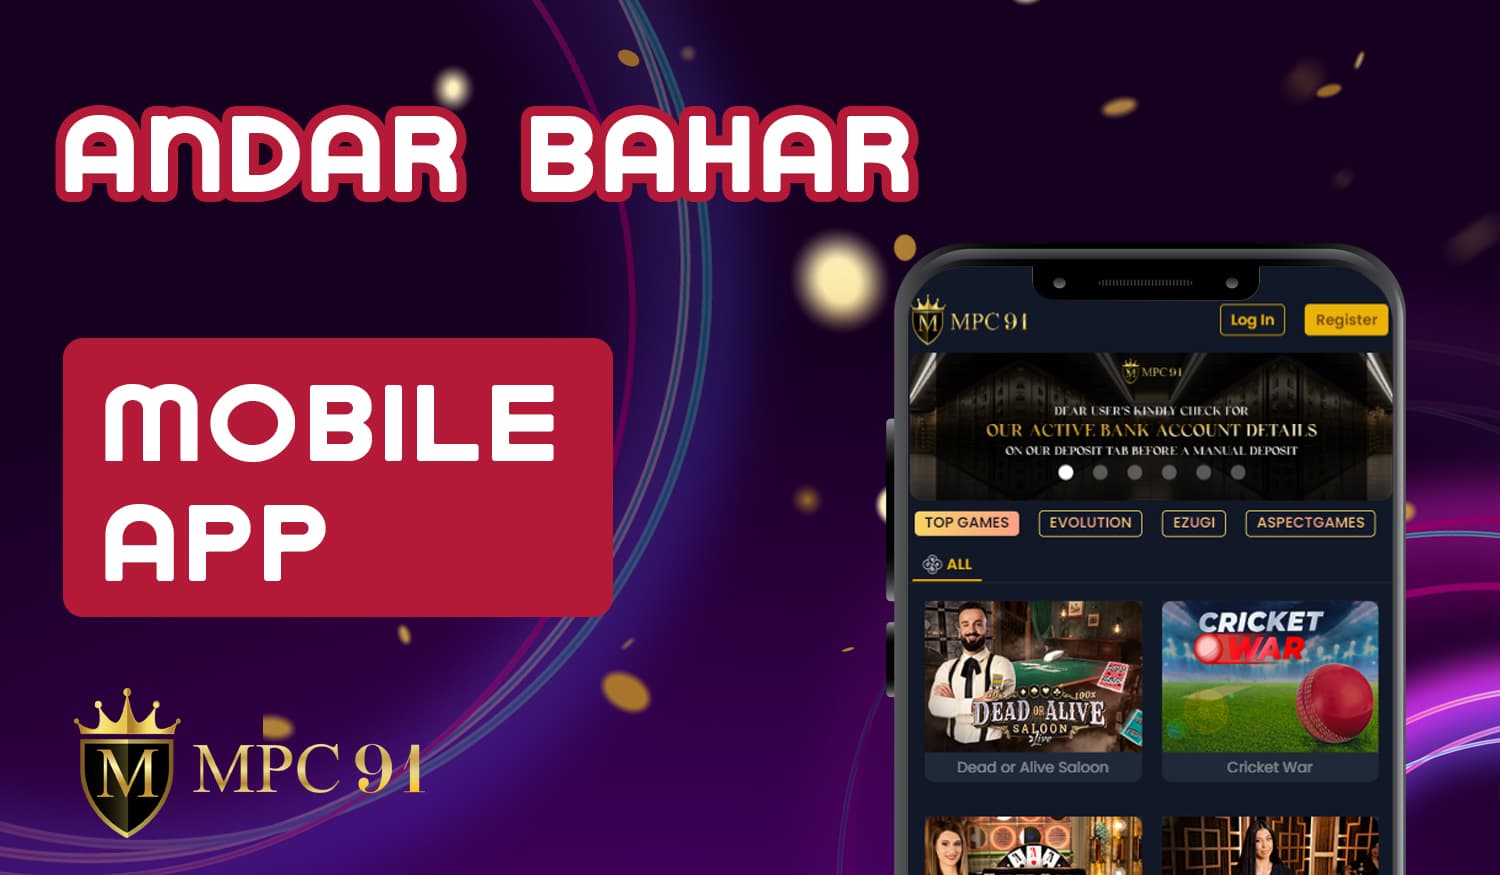 How to download and install MPC91 Casino's mobile app to play Andar Bahar